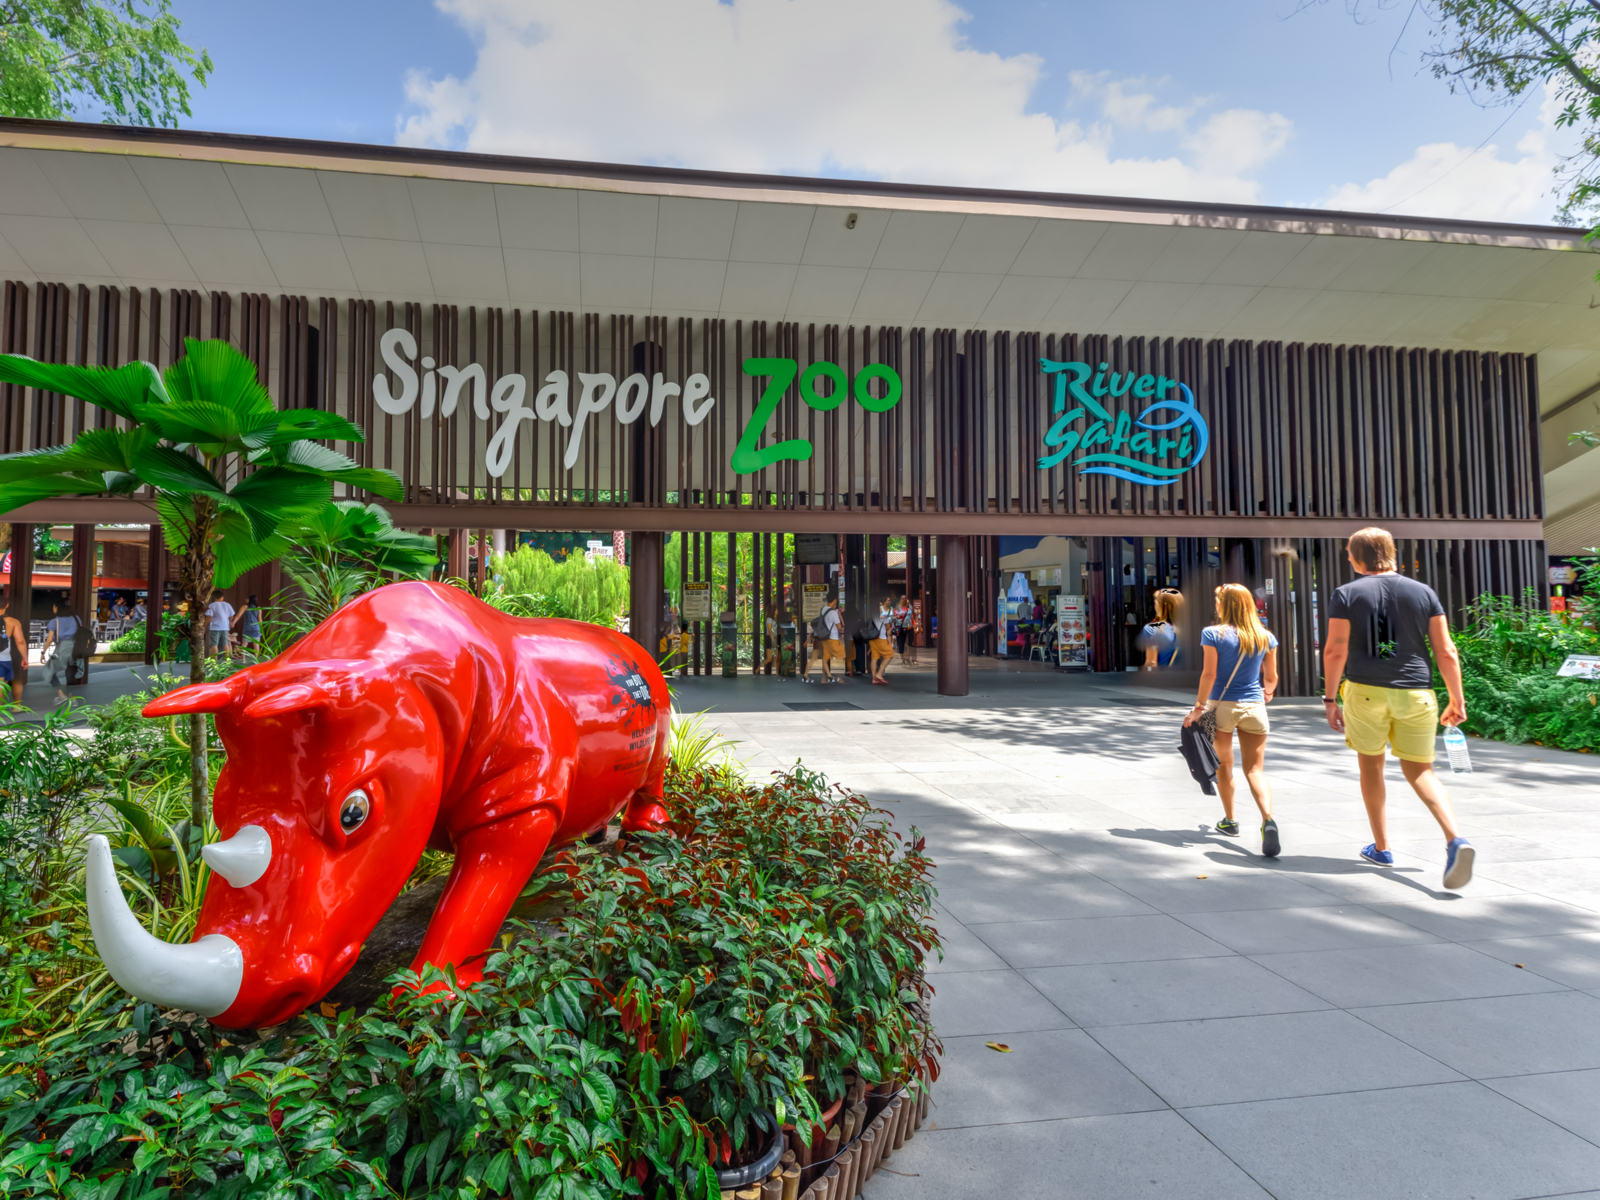 Visitors walk into the Singapore zoo, just outside the entrance